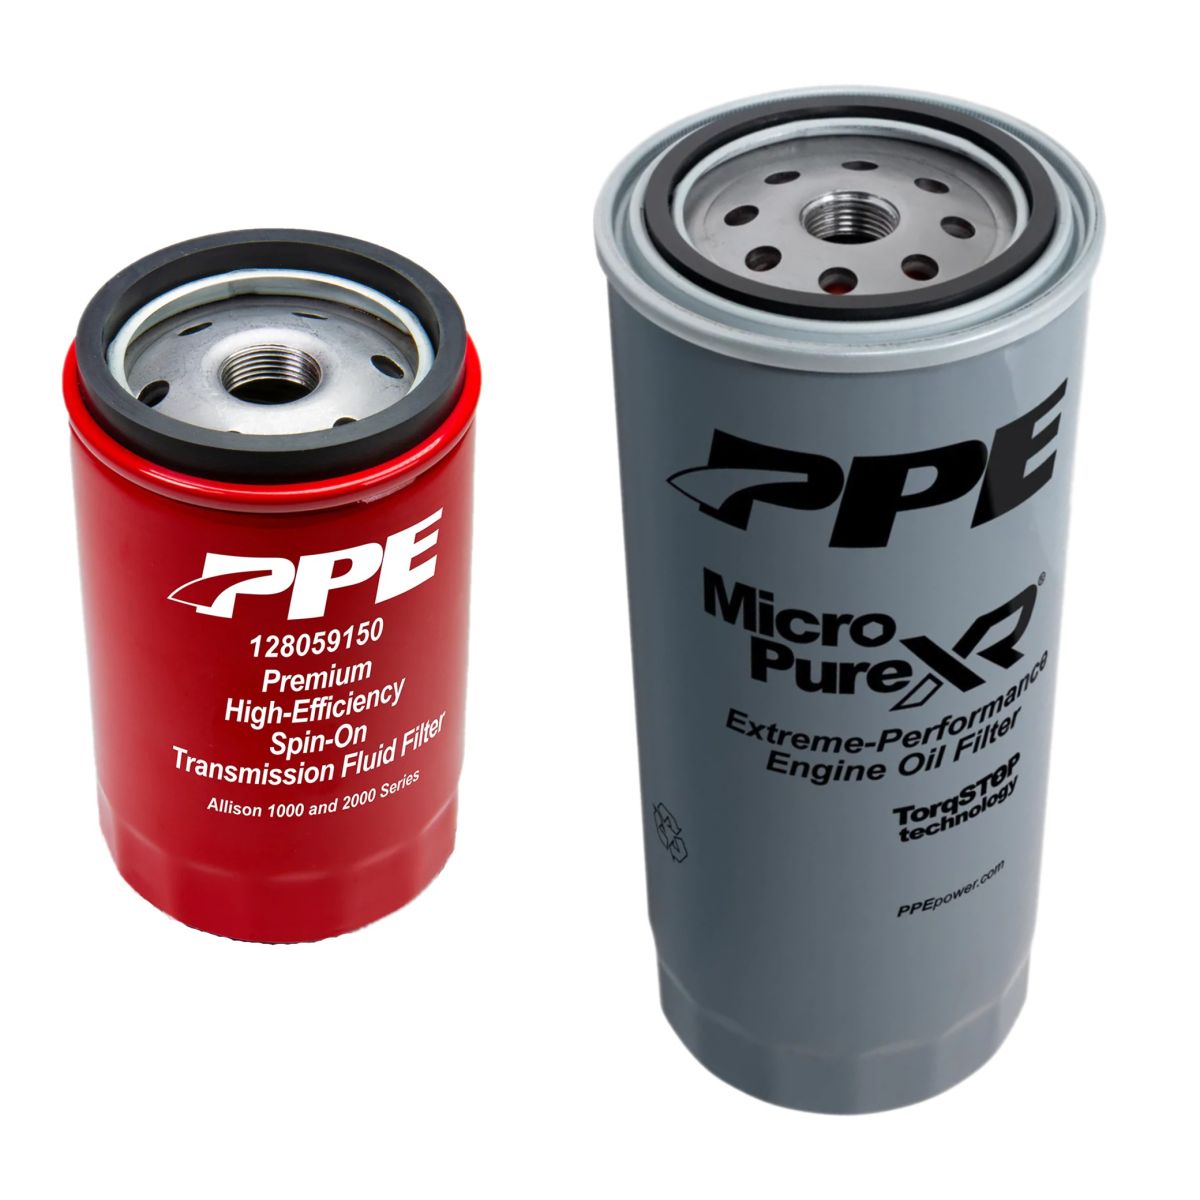 PPE - PPE MicroPure Extreme-Performance Oil Filter & Double Deep Spin-On Transmission Filter For 01-19 6.6L Duramax